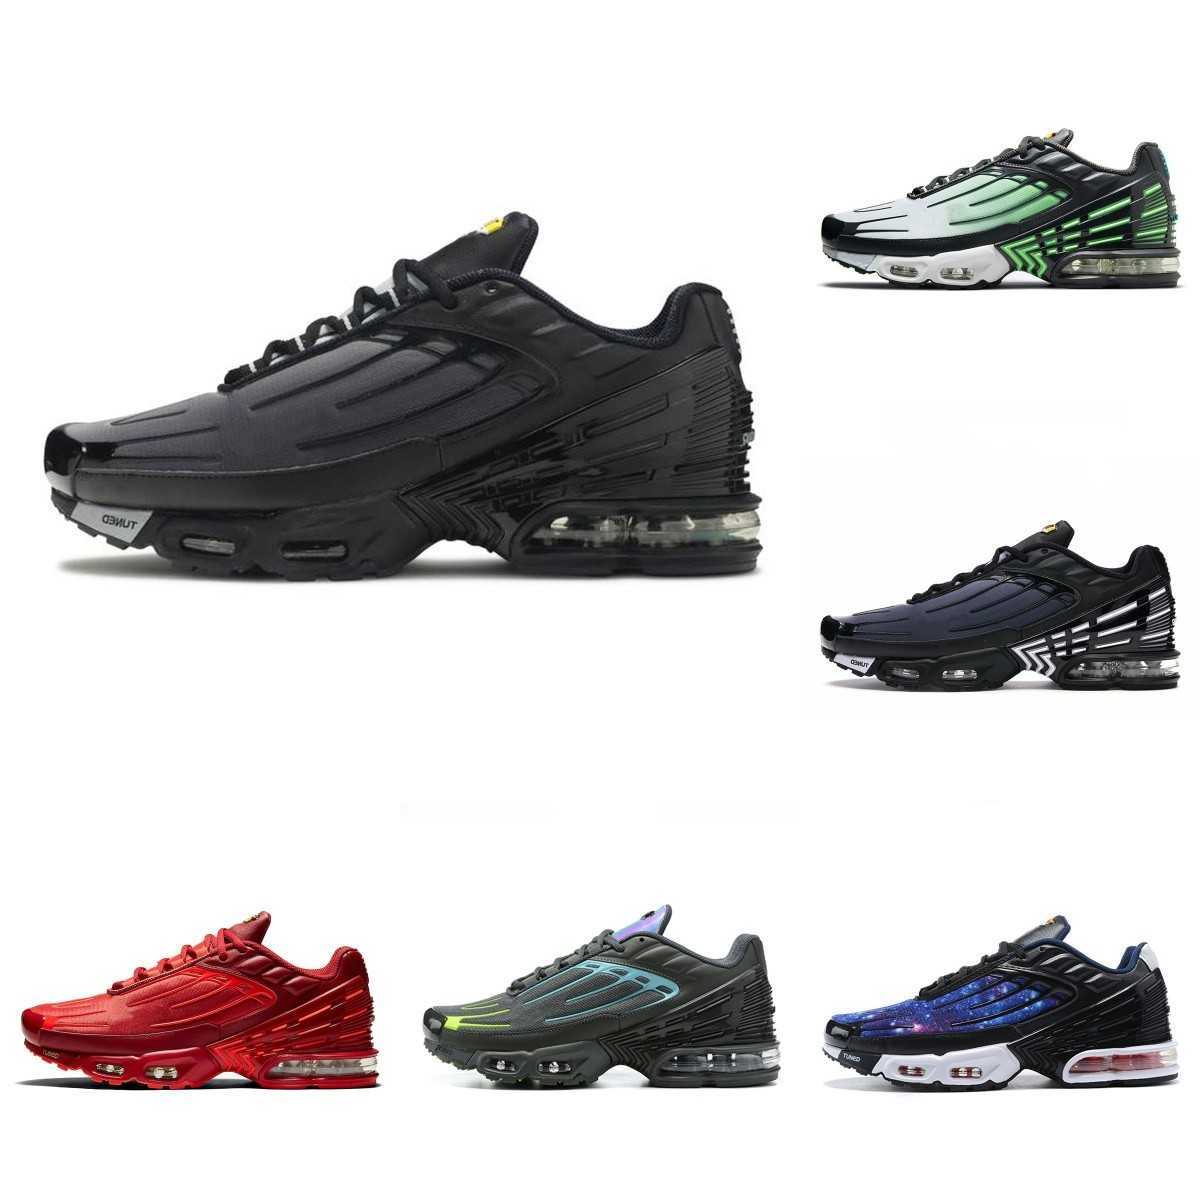 

Trainers Tn Plus 3 Tuned Mens Sports Shoes Laser Blue White Aquamarine AIRS Blud Void Requin Obsidian Hyper Violet Deep Parachute Ghost Green Triple Black Sneakers, Please contact us